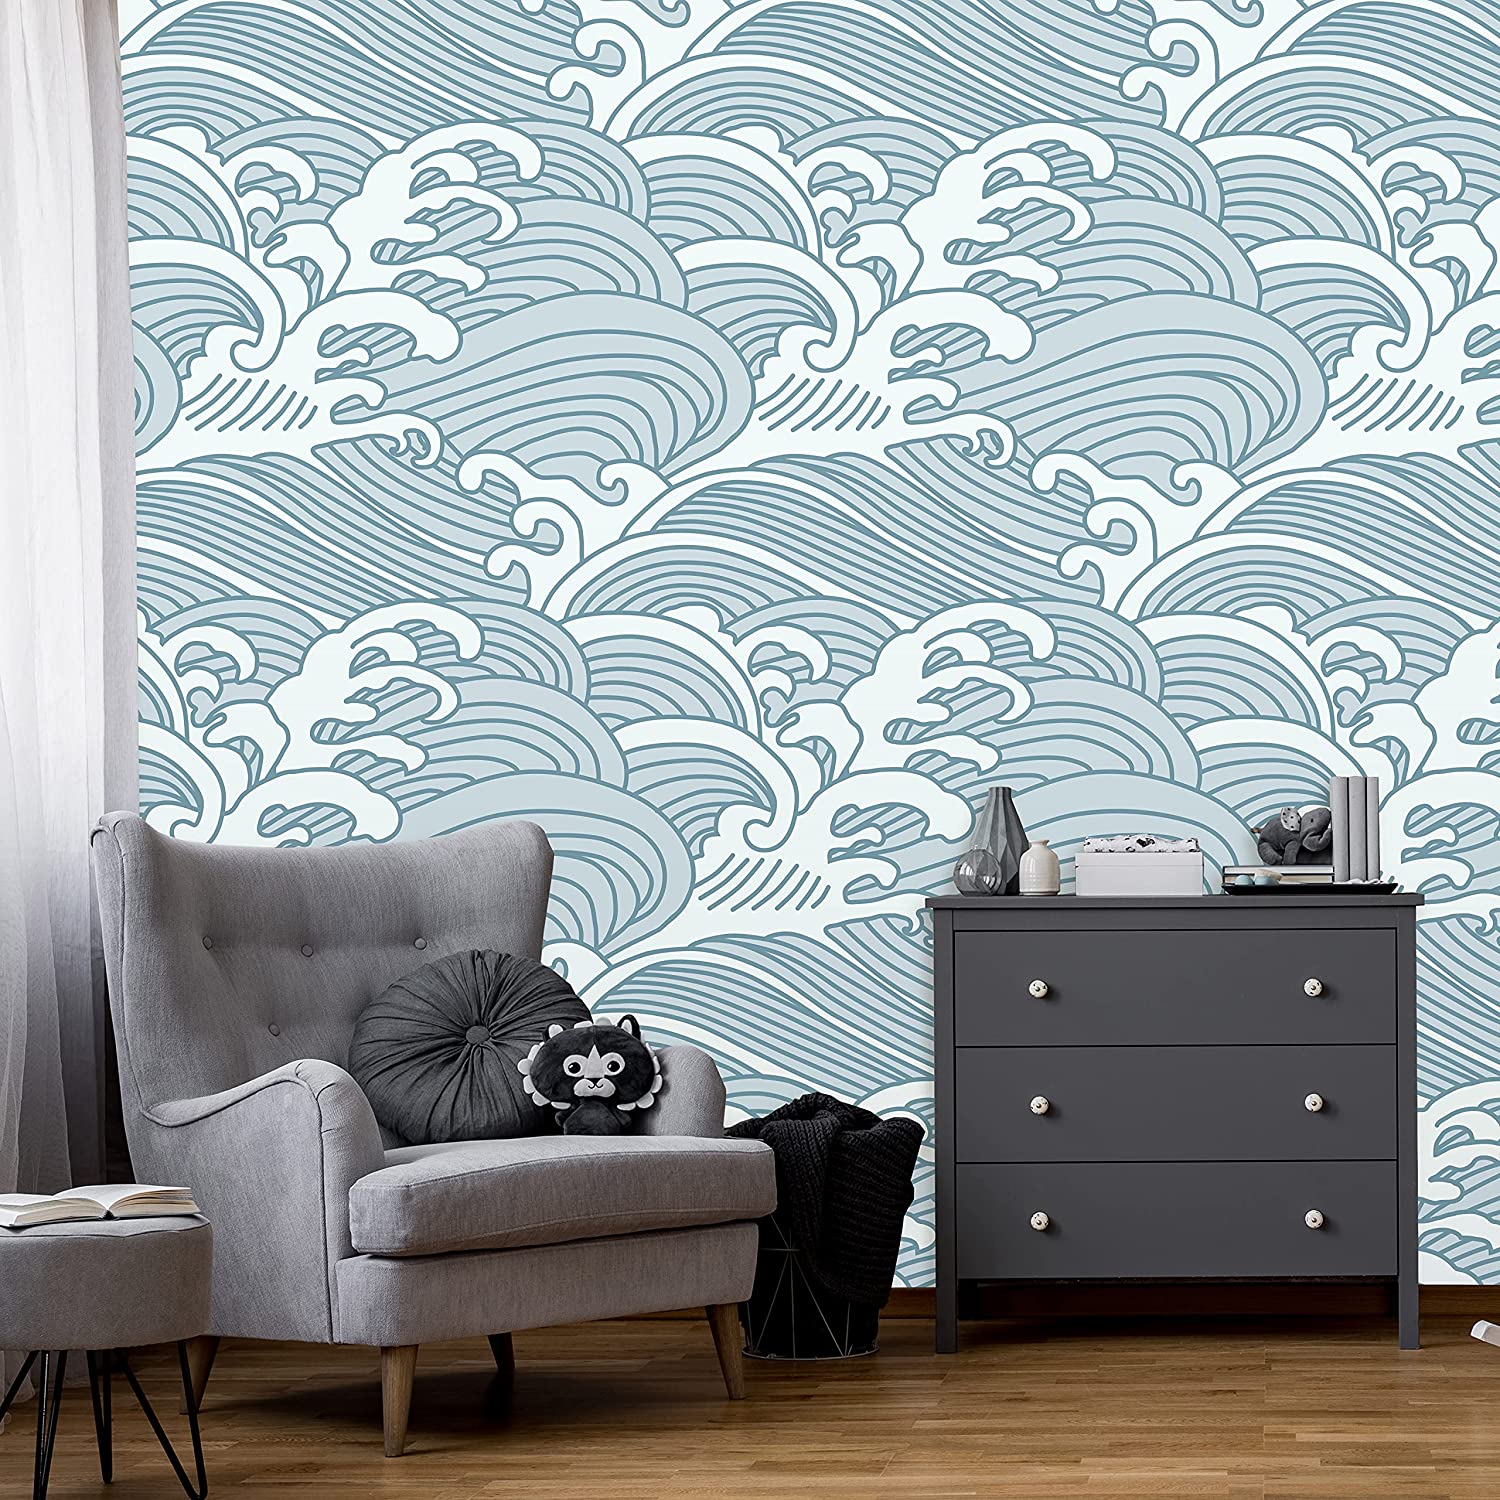 Peel and Stick Wallpaper With Watercolor Waves Pattern  Etsy  Mural  wallpaper Wall patterns Wall wallpaper